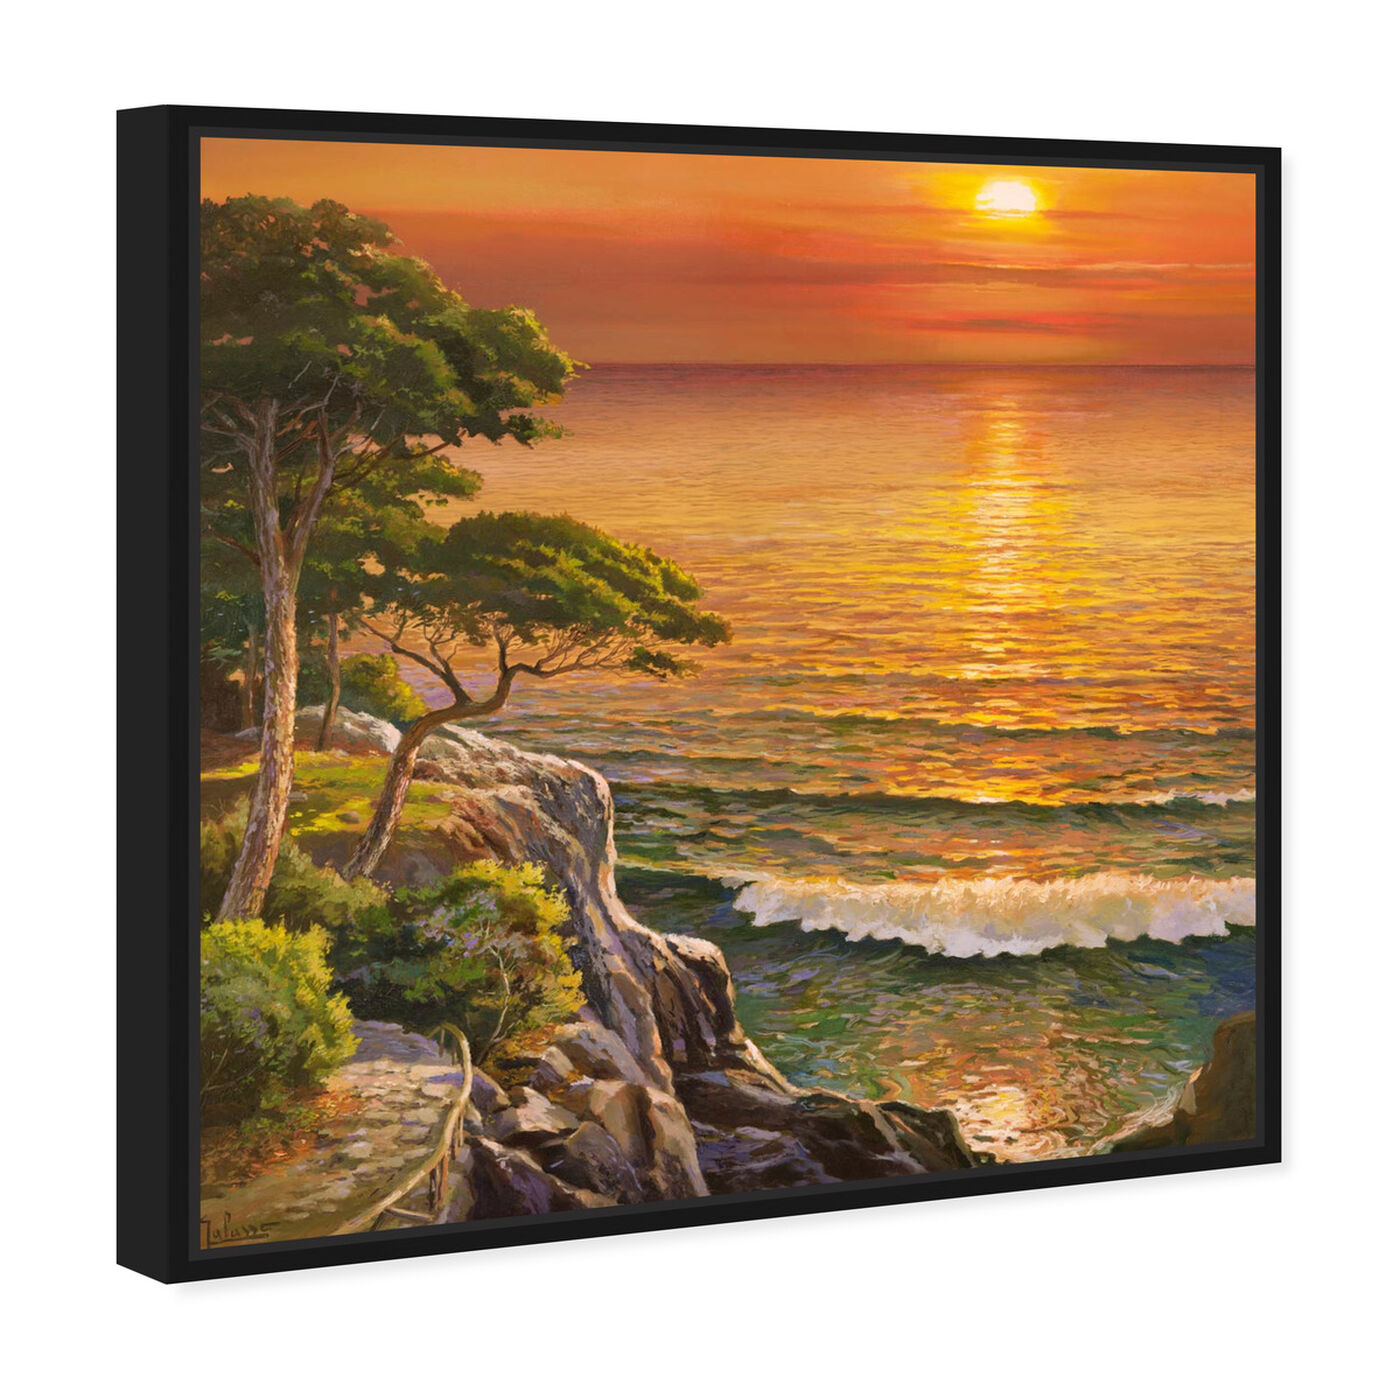 Angled view of Sai - Sunset Visage 1AD2552 featuring nature and landscape and sunrise and sunsets art.